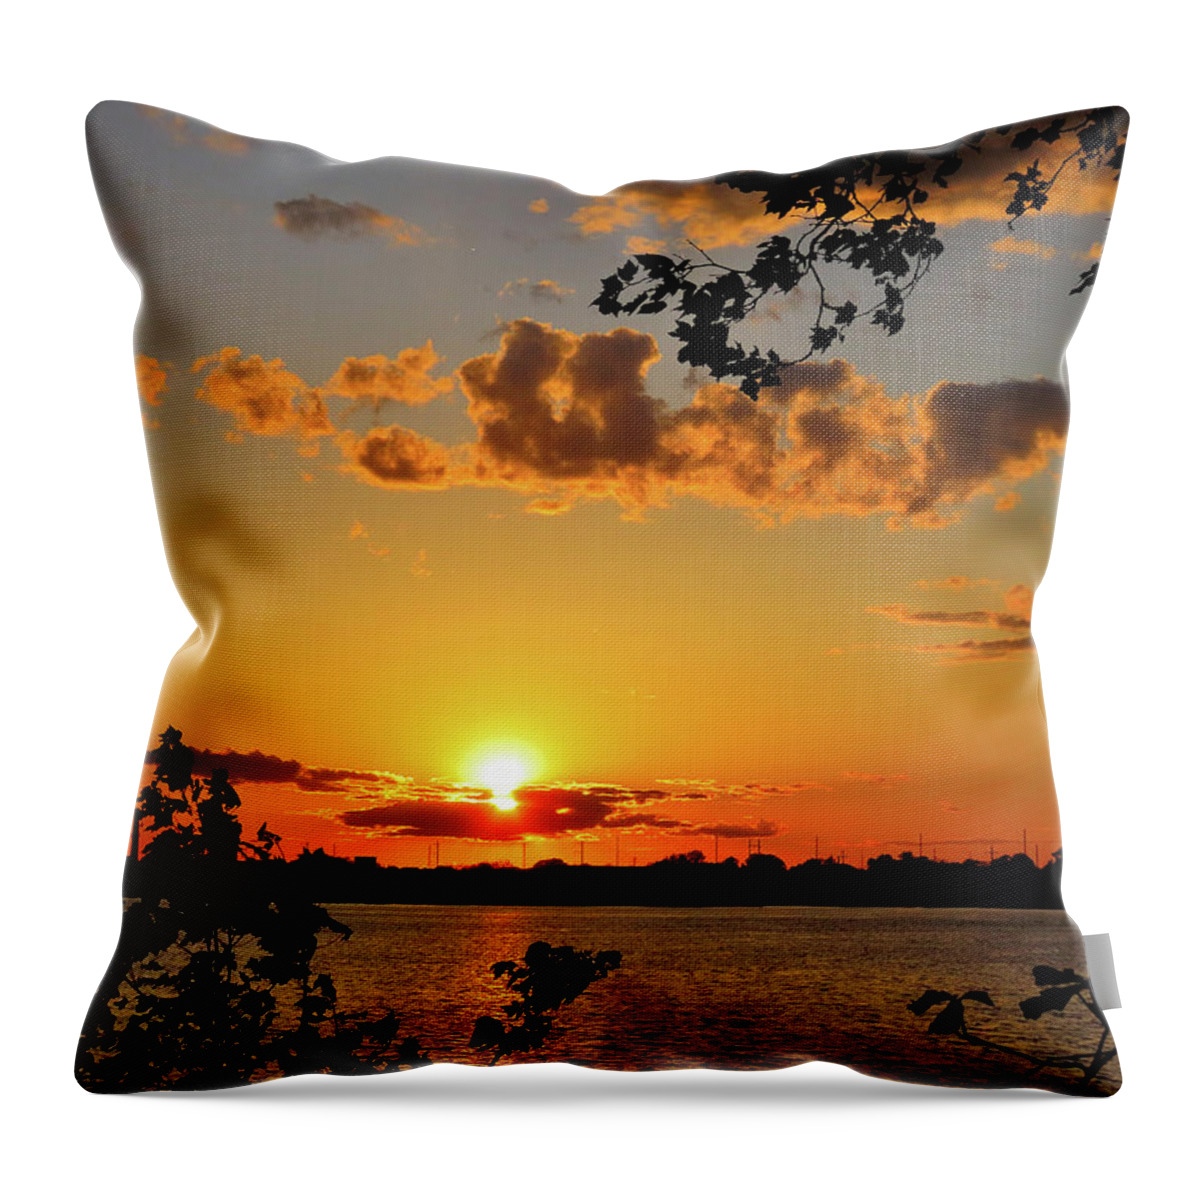 Sunset Throw Pillow featuring the photograph Sun Setting Over Philadelphia by Linda Stern